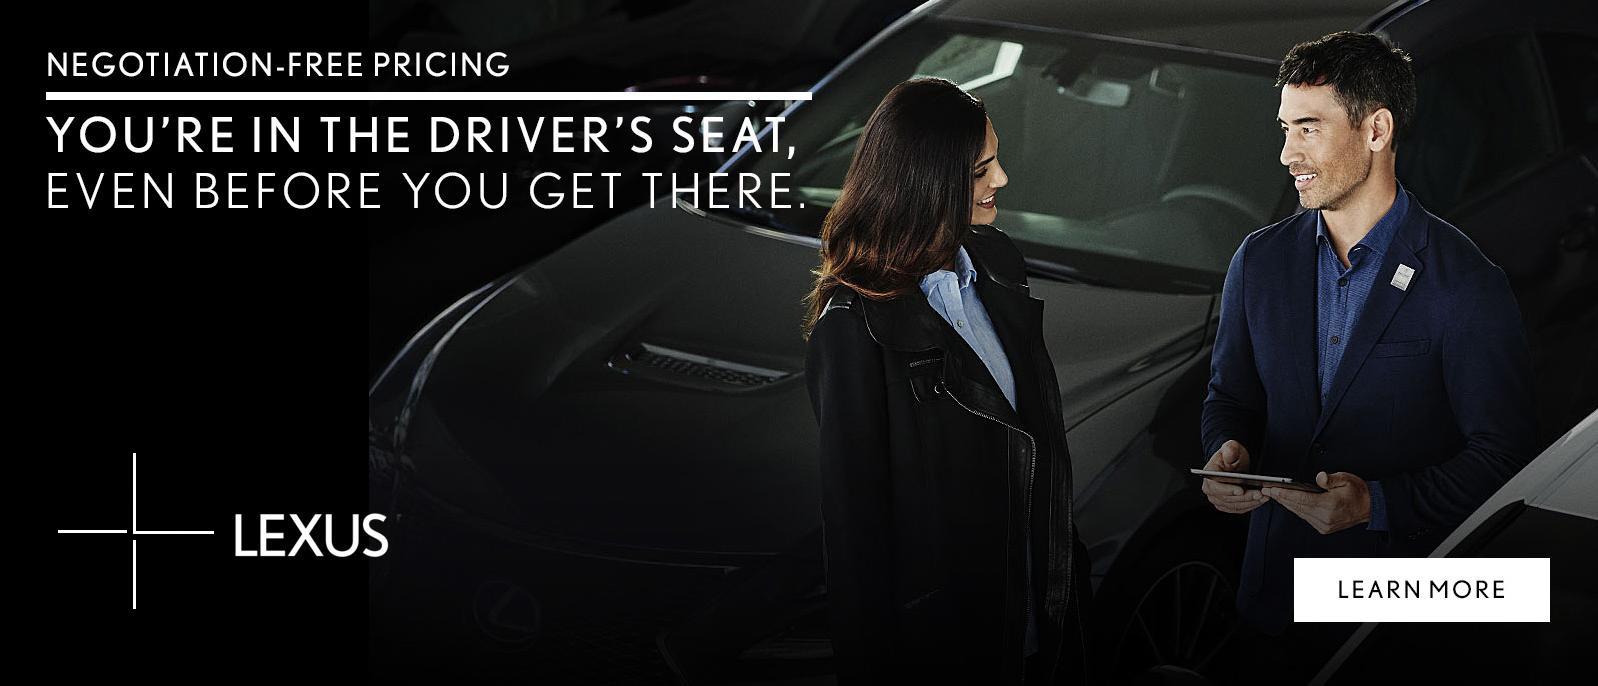 Negotiation-Free Pricing: You're in the driver's seat even before you get here.